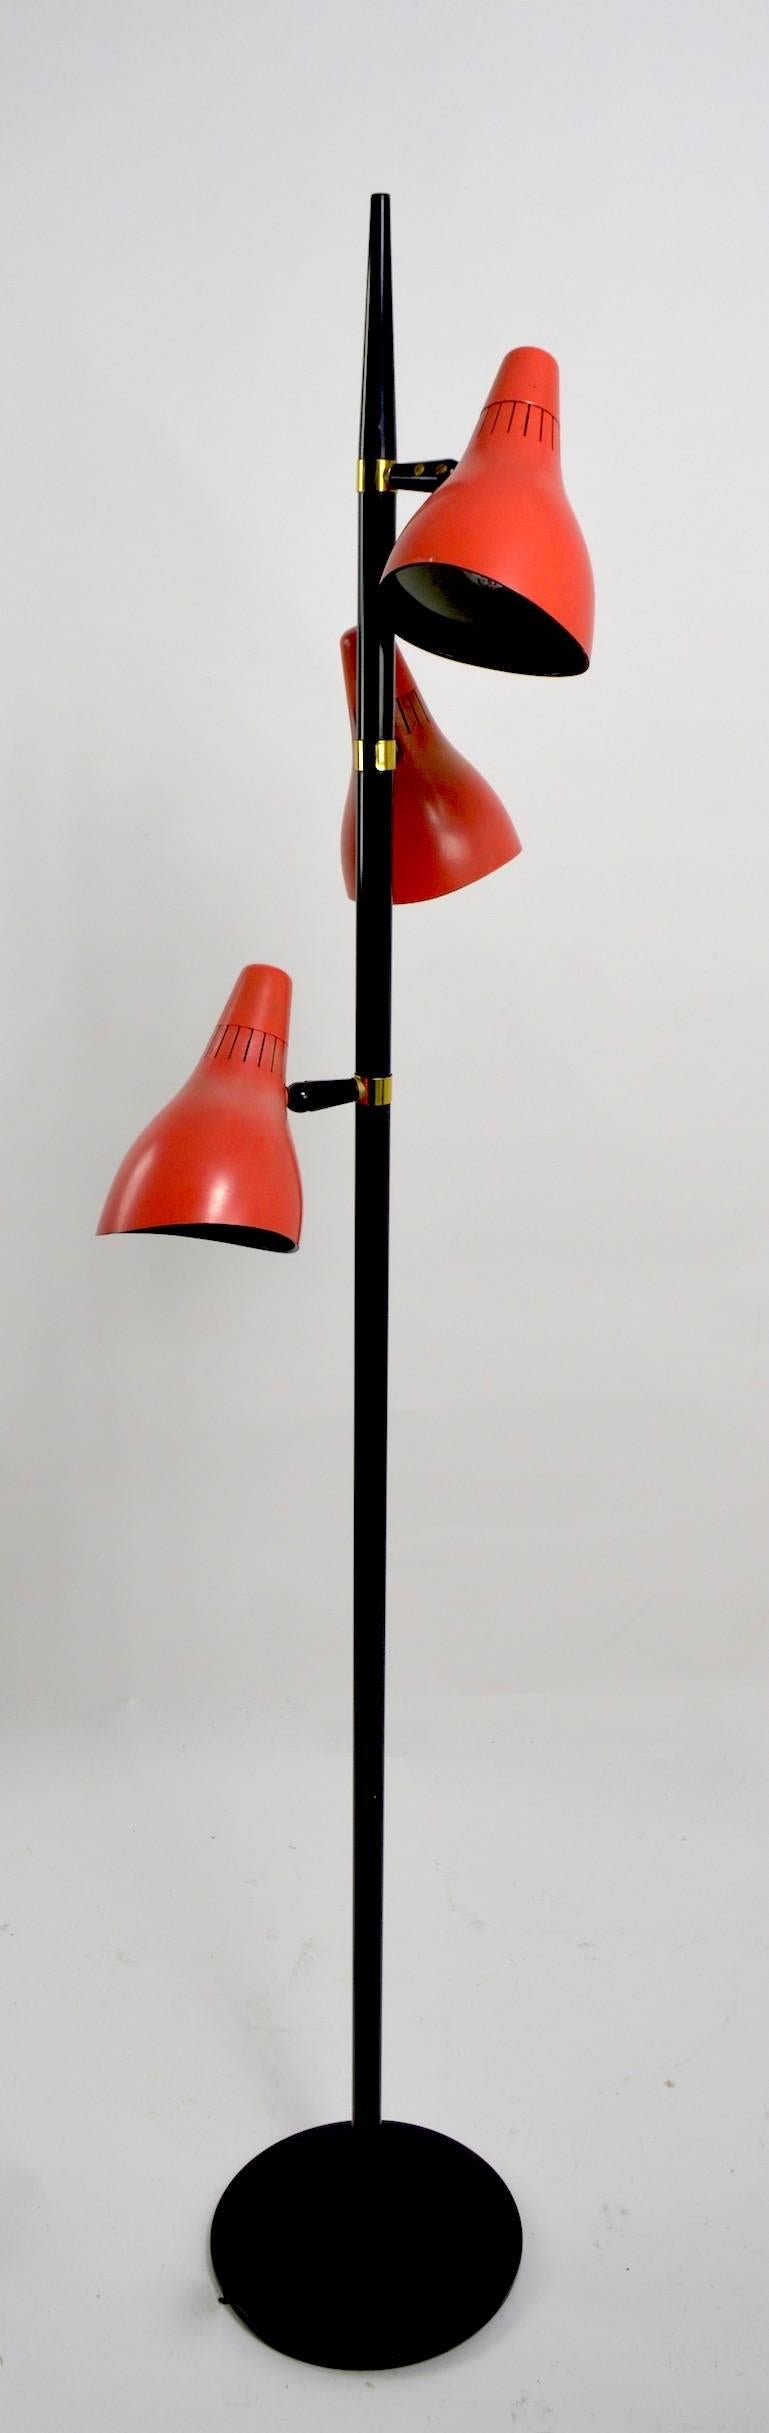 Two three-light floor lamps, designed by Gerald Thurston for Lightolier, each having hooded cone lights ( 8.5 inch L x 5.5 inch Dia. ) which have independent on/off switches, and are adjustable in position. One floor lamp has three different colored